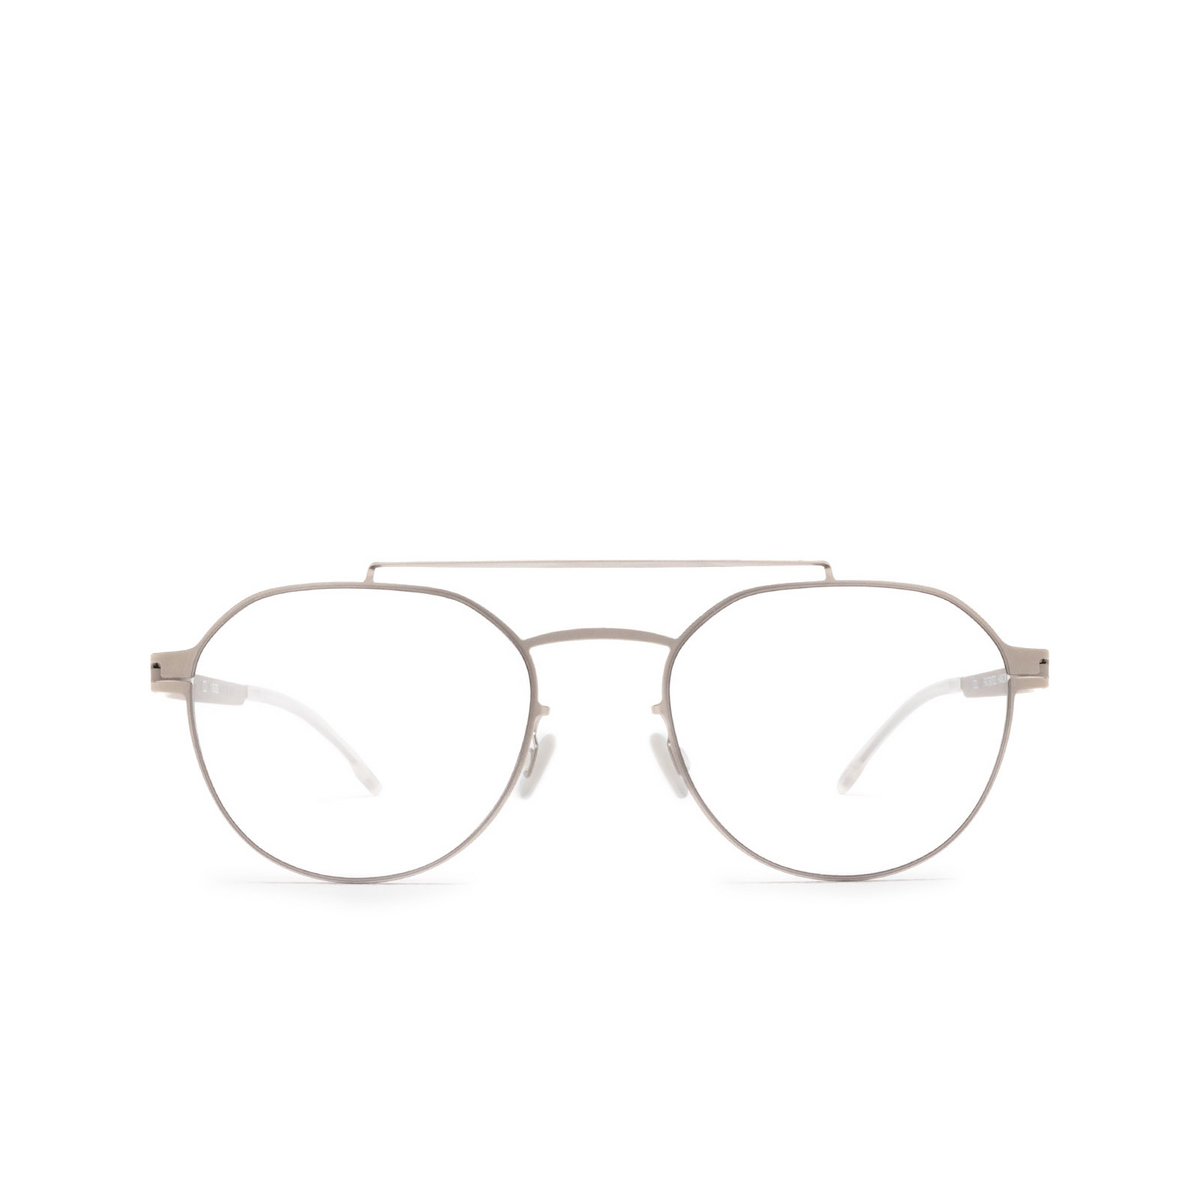 Mykita® Square Eyeglasses: ML04 color 470 Matte Silver - front view